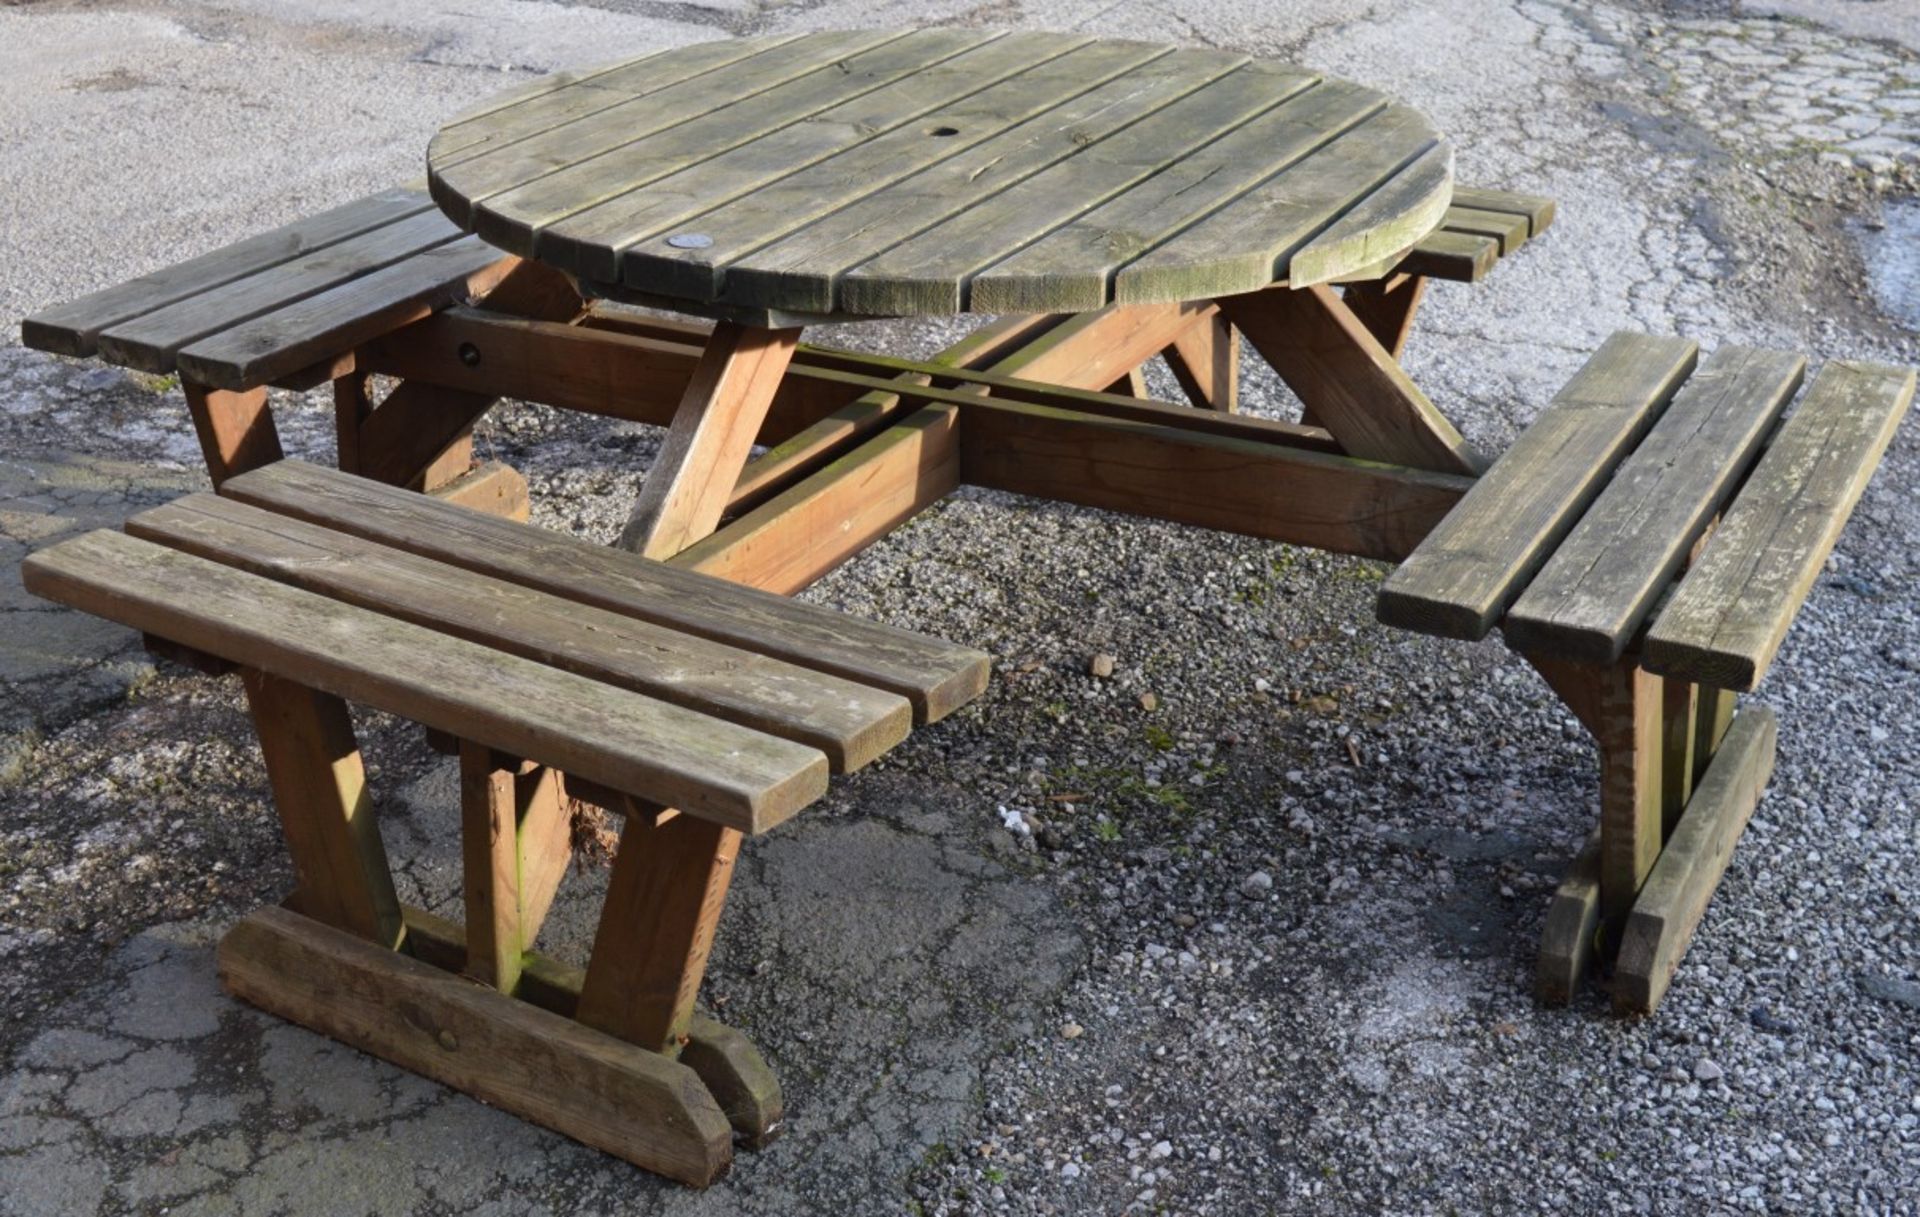 1 x Outdoor Picnic Pub Bench - Designed For 8 People To Be Sat Around a Circular Table - Ideal For - Image 3 of 3